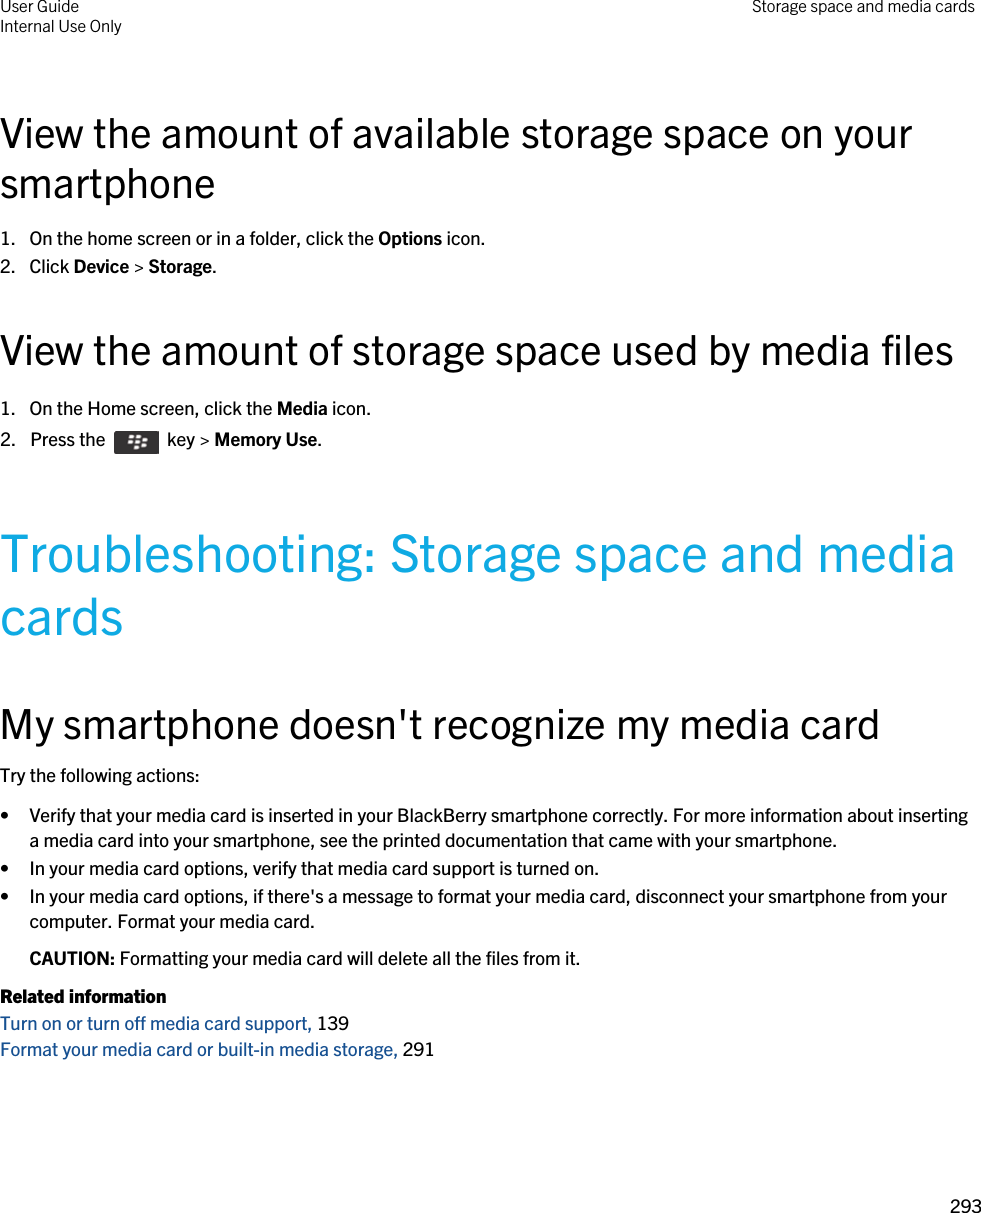 View the amount of available storage space on your smartphone1. On the home screen or in a folder, click the Options icon.2. Click Device &gt; Storage.View the amount of storage space used by media files1. On the Home screen, click the Media icon.2.  Press the    key &gt; Memory Use. Troubleshooting: Storage space and media cardsMy smartphone doesn&apos;t recognize my media cardTry the following actions:• Verify that your media card is inserted in your BlackBerry smartphone correctly. For more information about inserting a media card into your smartphone, see the printed documentation that came with your smartphone.• In your media card options, verify that media card support is turned on.• In your media card options, if there&apos;s a message to format your media card, disconnect your smartphone from your computer. Format your media card.CAUTION: Formatting your media card will delete all the files from it.Related informationTurn on or turn off media card support, 139 Format your media card or built-in media storage, 291 User GuideInternal Use Only Storage space and media cards293 